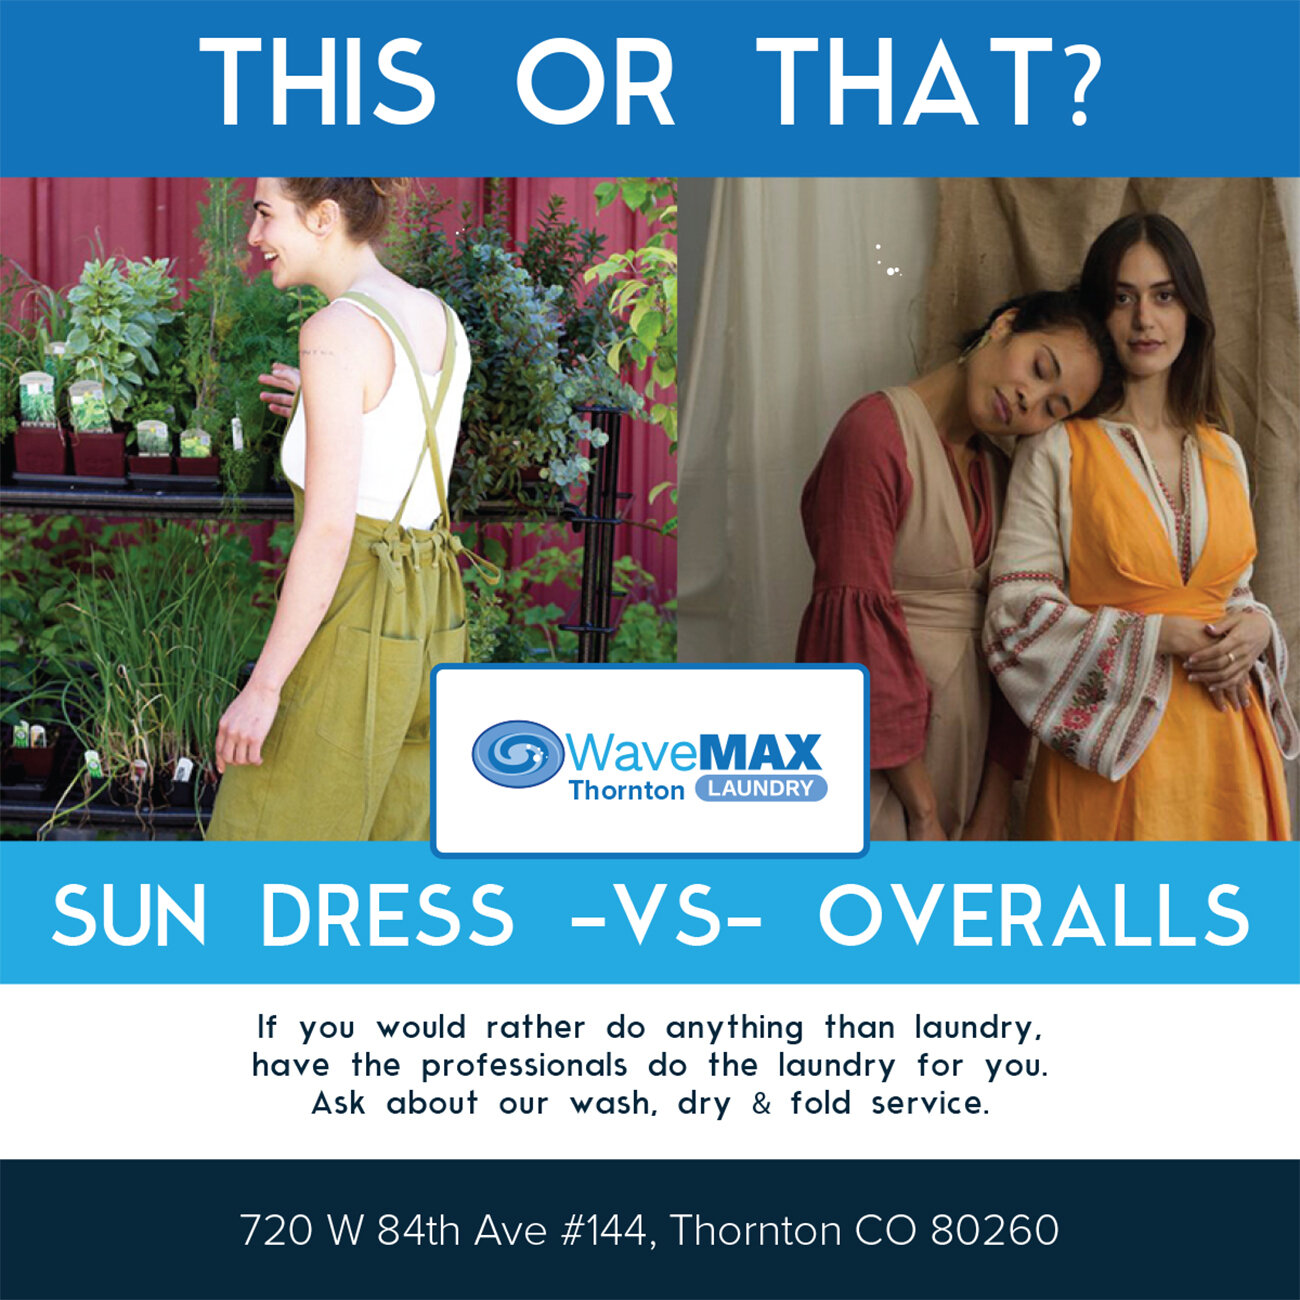 Sundress or Overalls? Whatever is your favorite, we will wash them with the utmost care. Free up some time without leaving your home, use our pickup and delivery service. We will pick up, wash, dry, fold and deliver your laundry for as little as $1.8